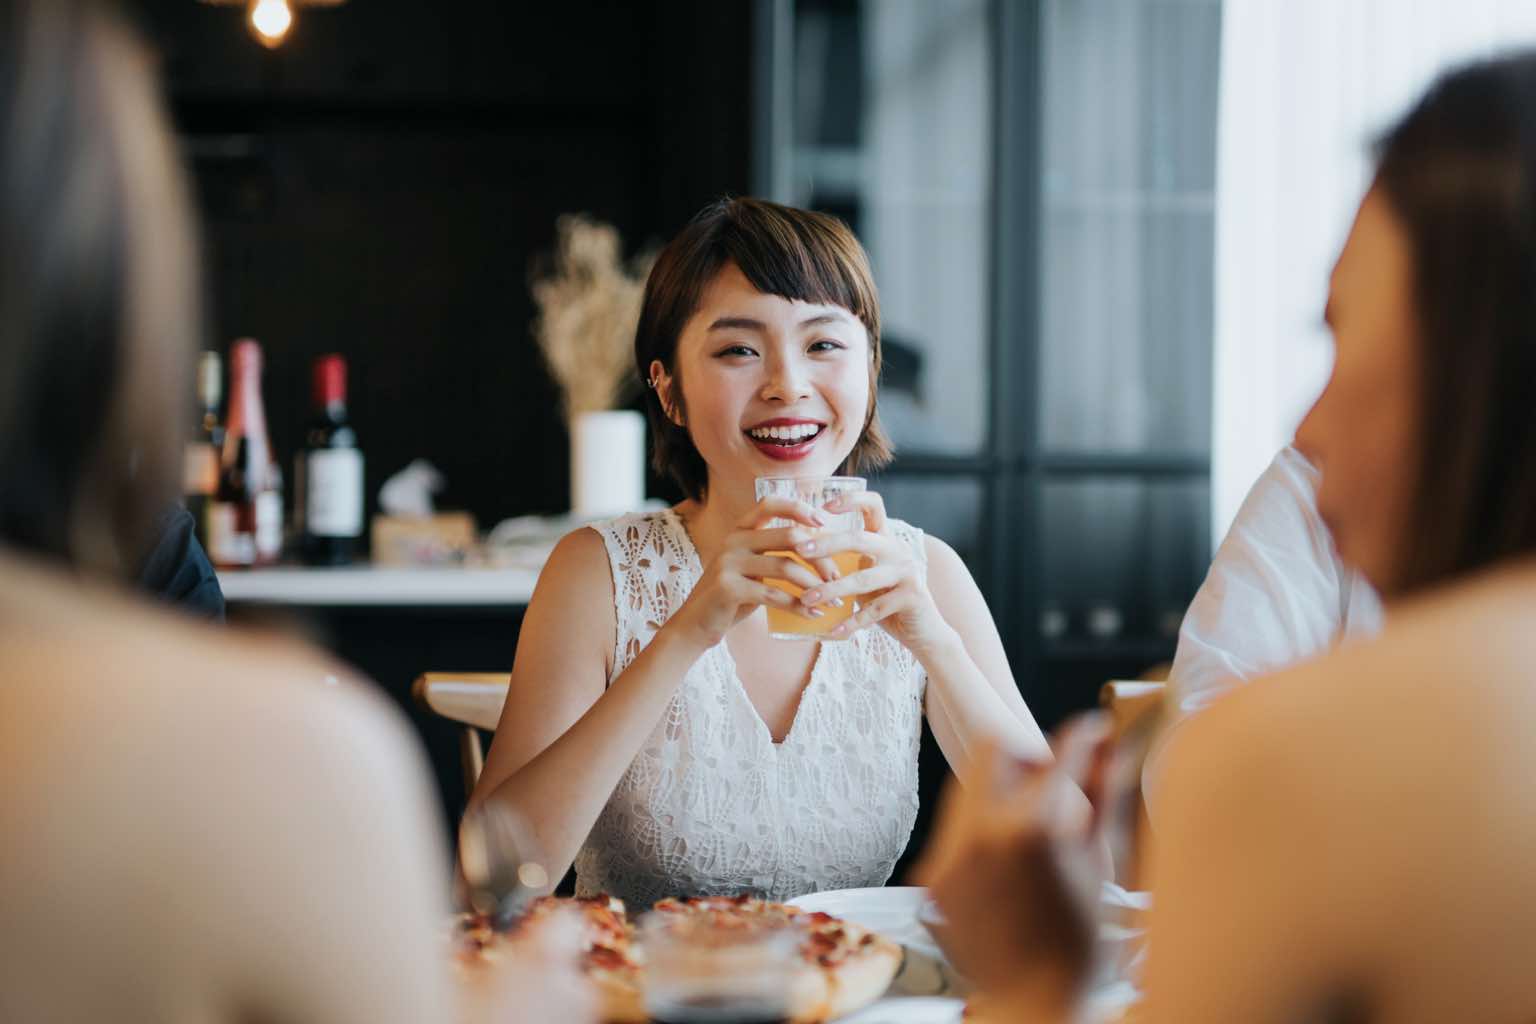 Women friends in their 20s enjoy pizza and cocktails at a restaurant